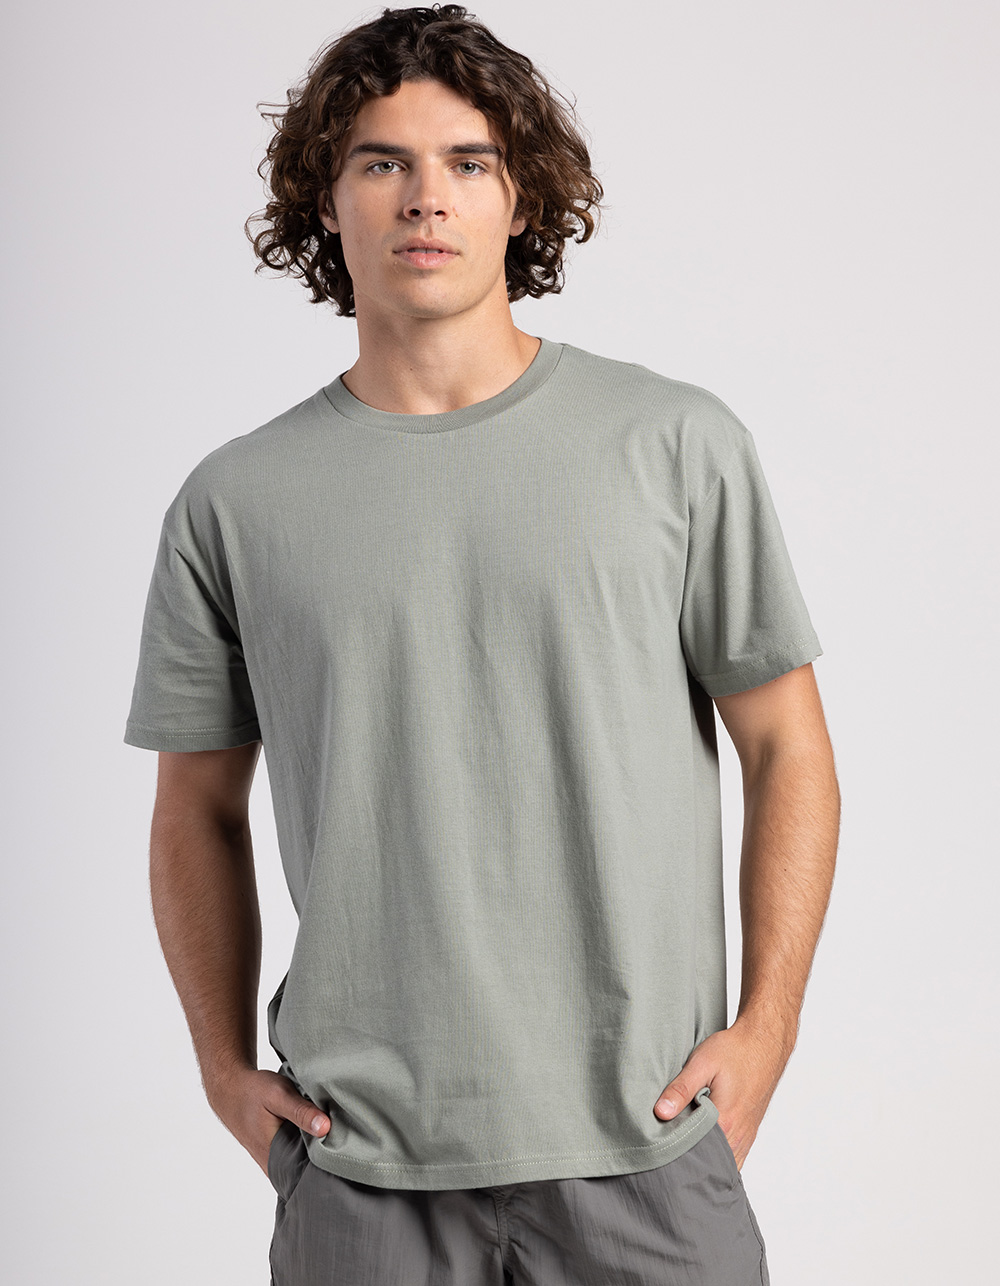 RSQ Mens Oversized Solid Tee - OLIVE | Tillys